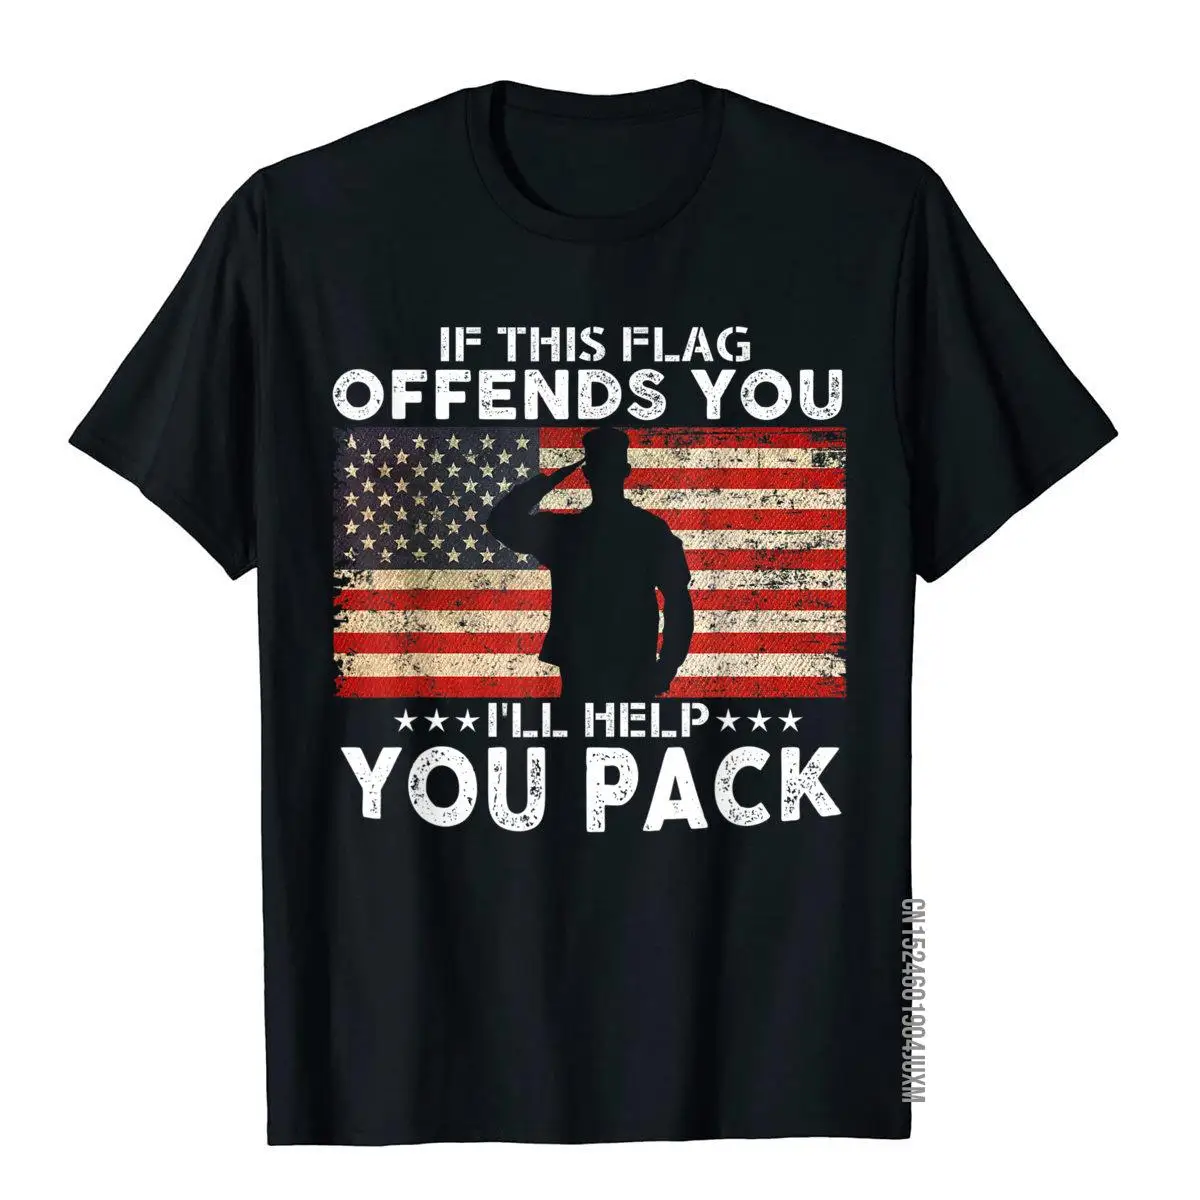 

If This Flag Offends You I'll Help You Pack US Flag T-Shirt T-Shirt Top T-Shirts Plain Cotton Tops Shirts Leisure For Men